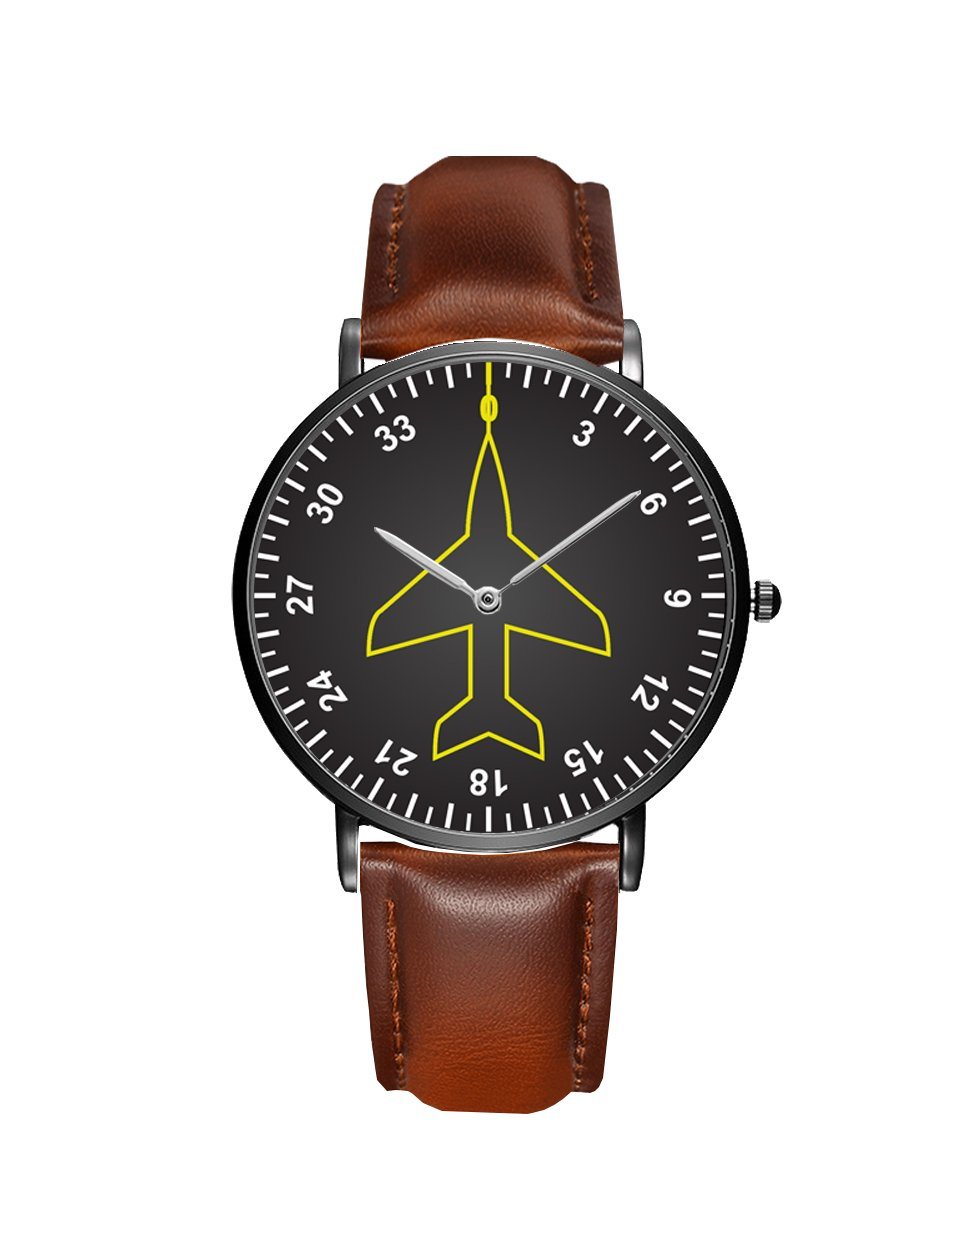 Airplane Instrument Series (Heading) Leather Strap Watches Pilot Eyes Store Black & Black Leather Strap 